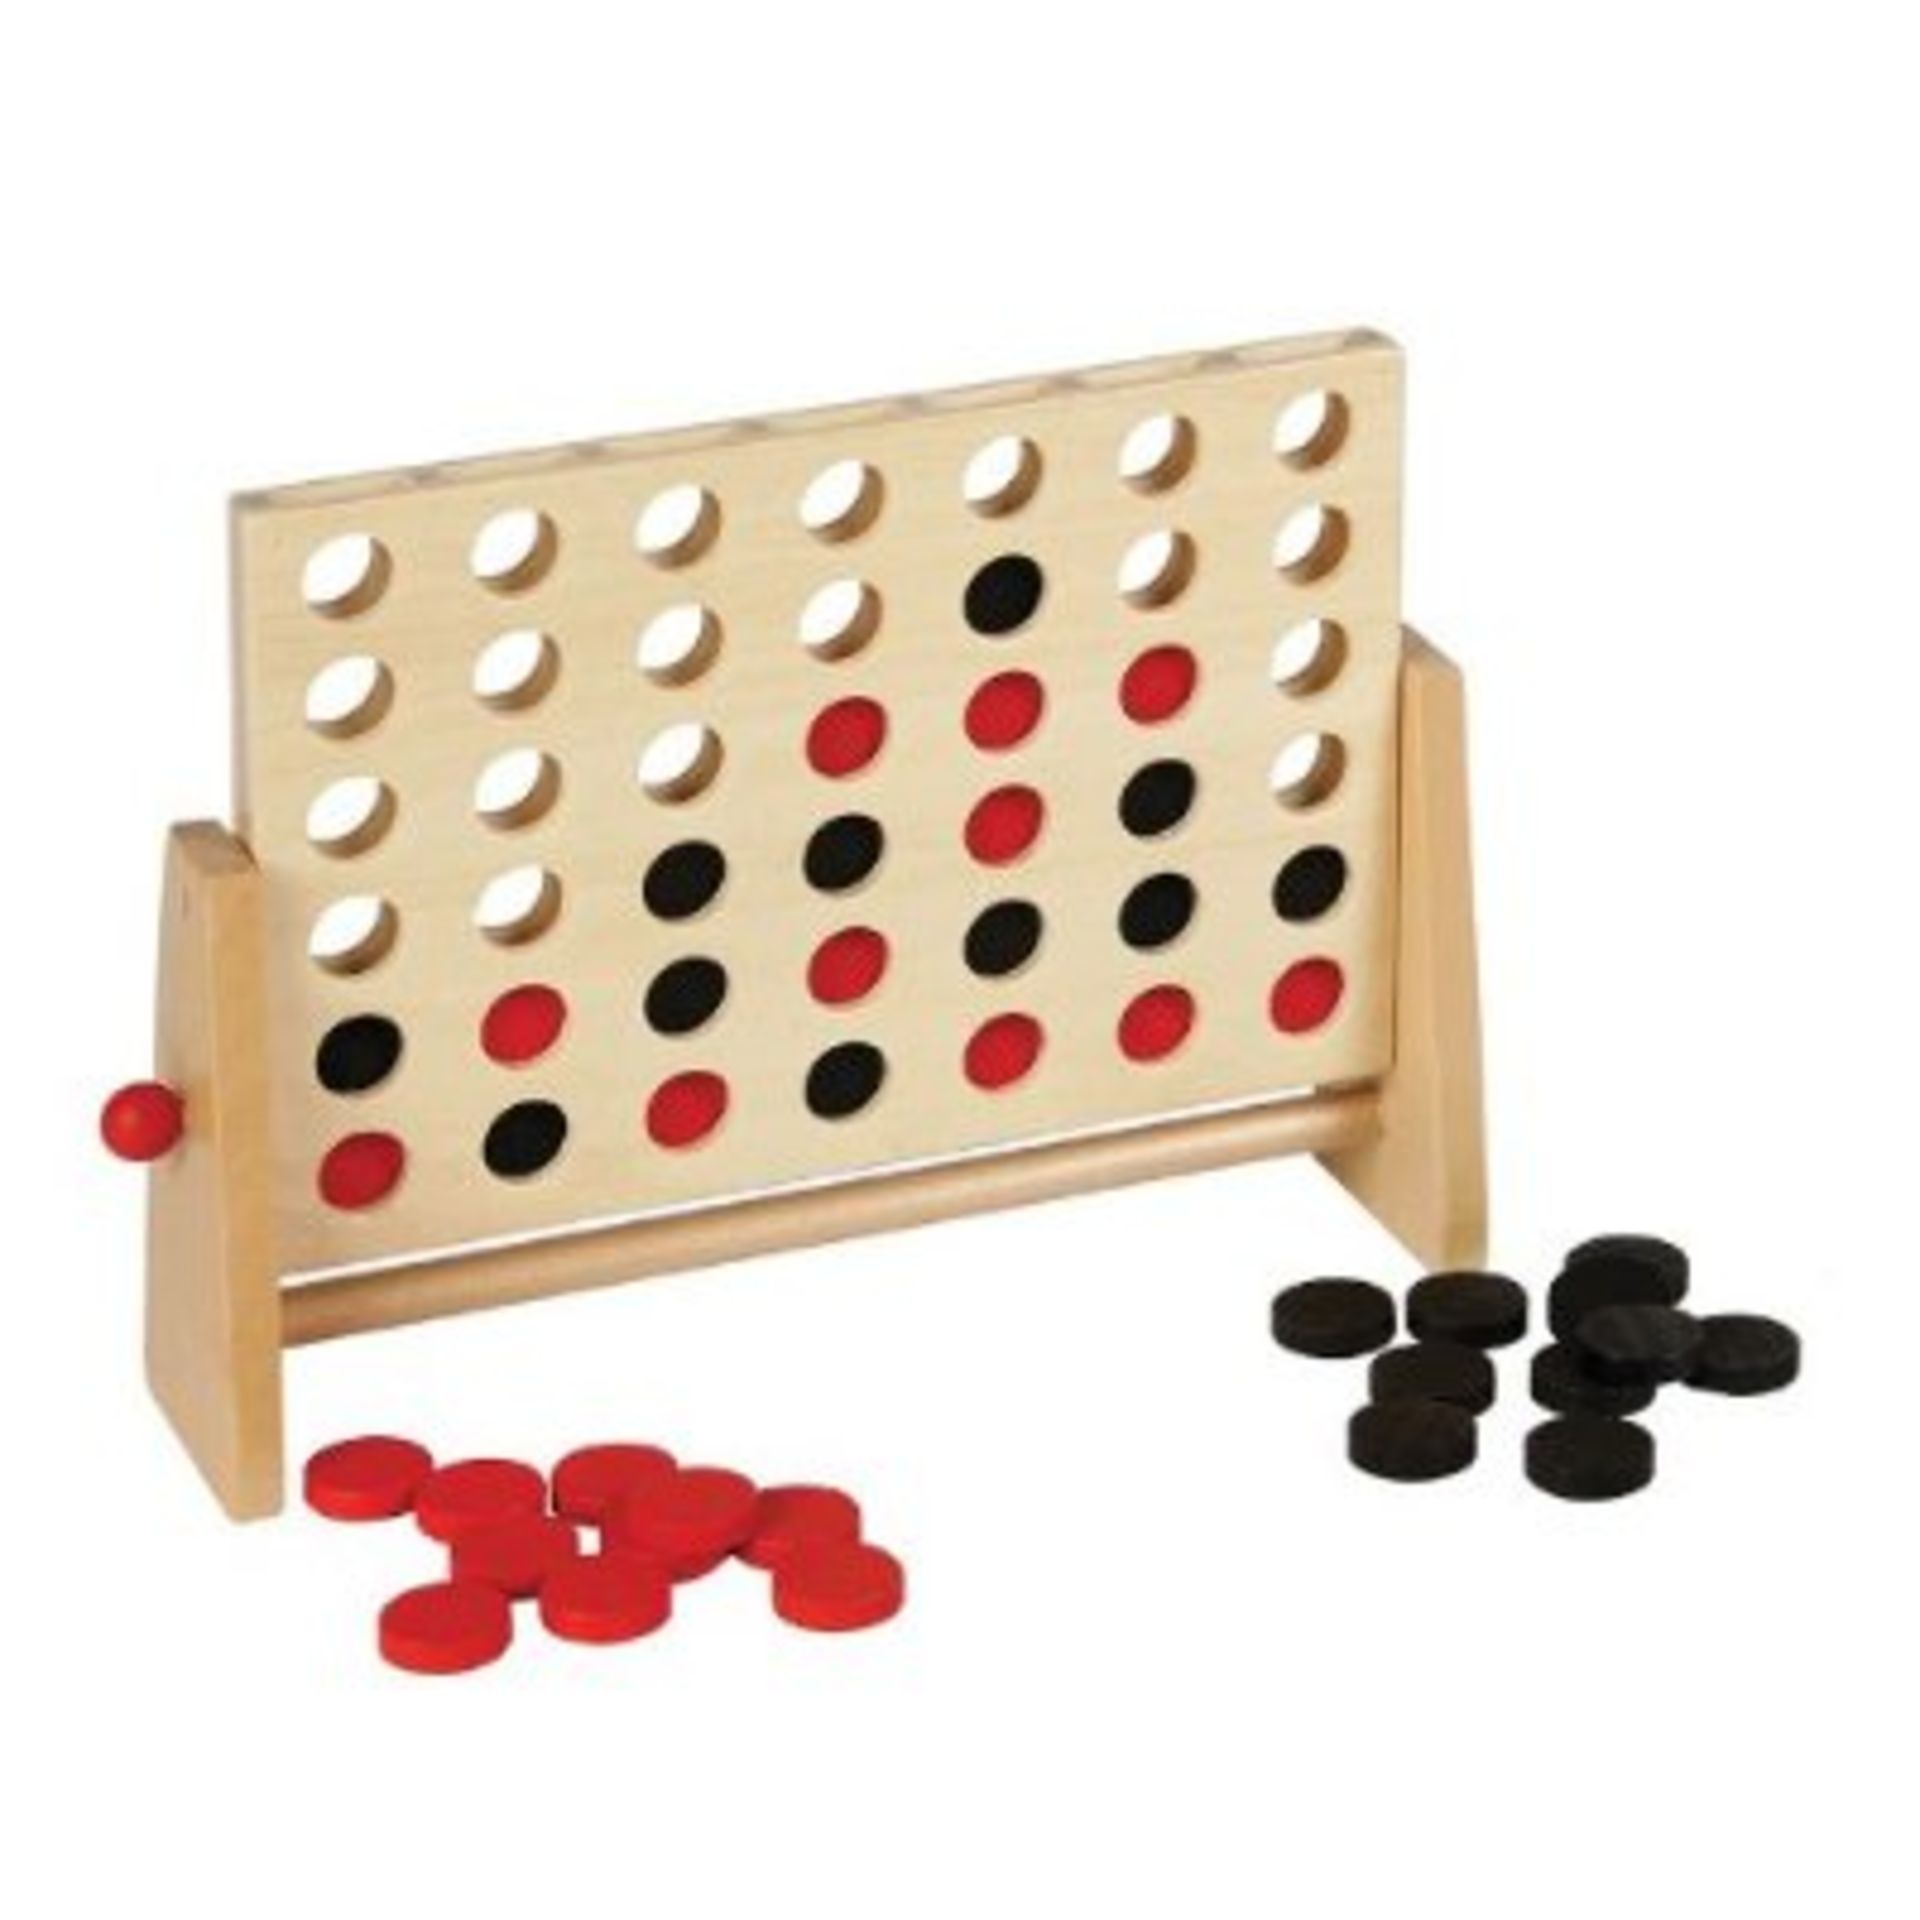 V Wooden Connect Four in a row game on swivel stand X  2  Bid price to be multiplied by Two